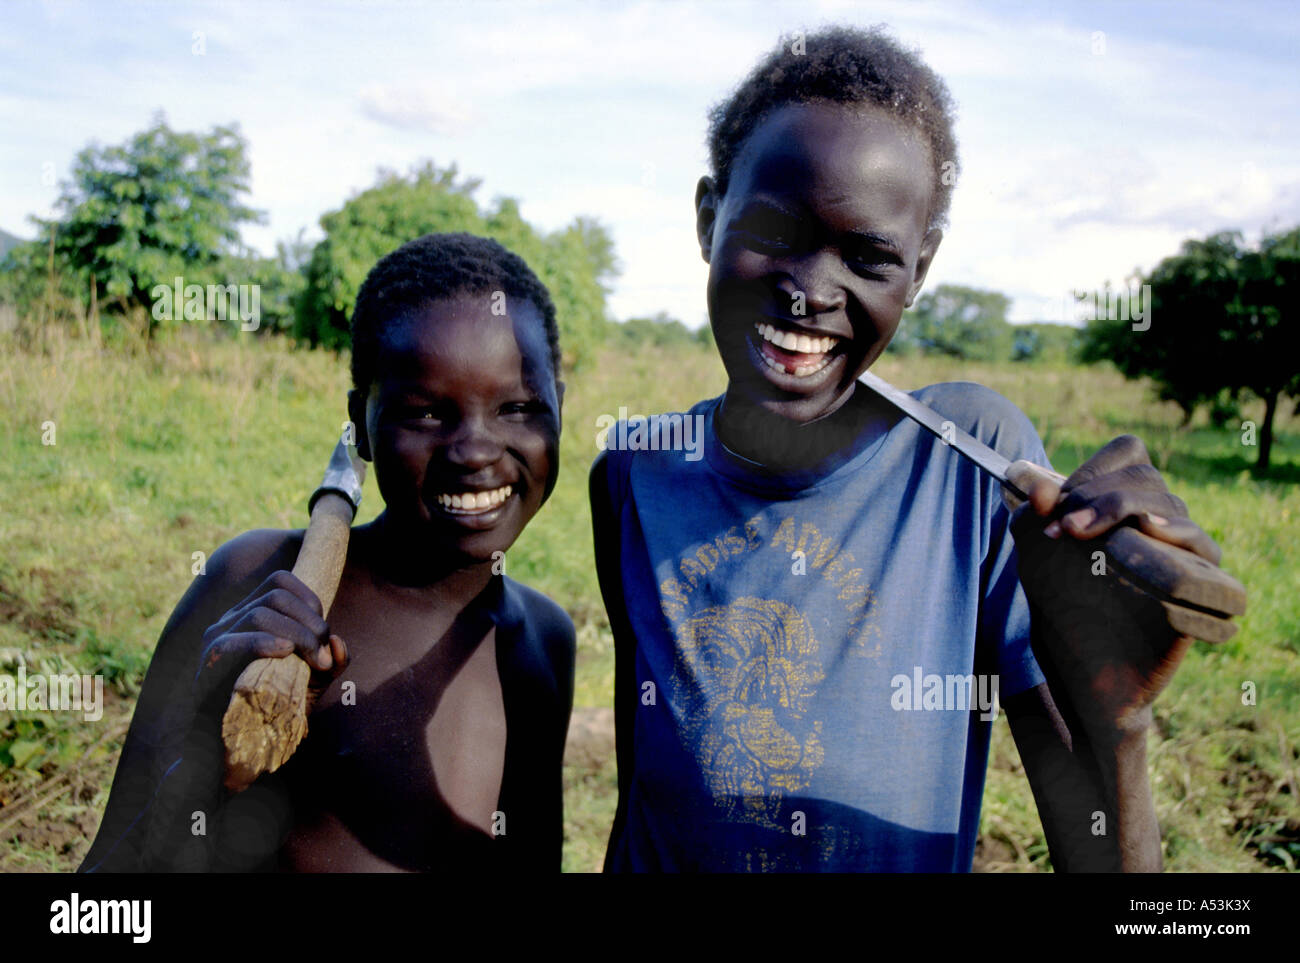 Painet ha1490 3021 children boys chukudum south sudan country developing nation less economically developed culture emerging Stock Photo